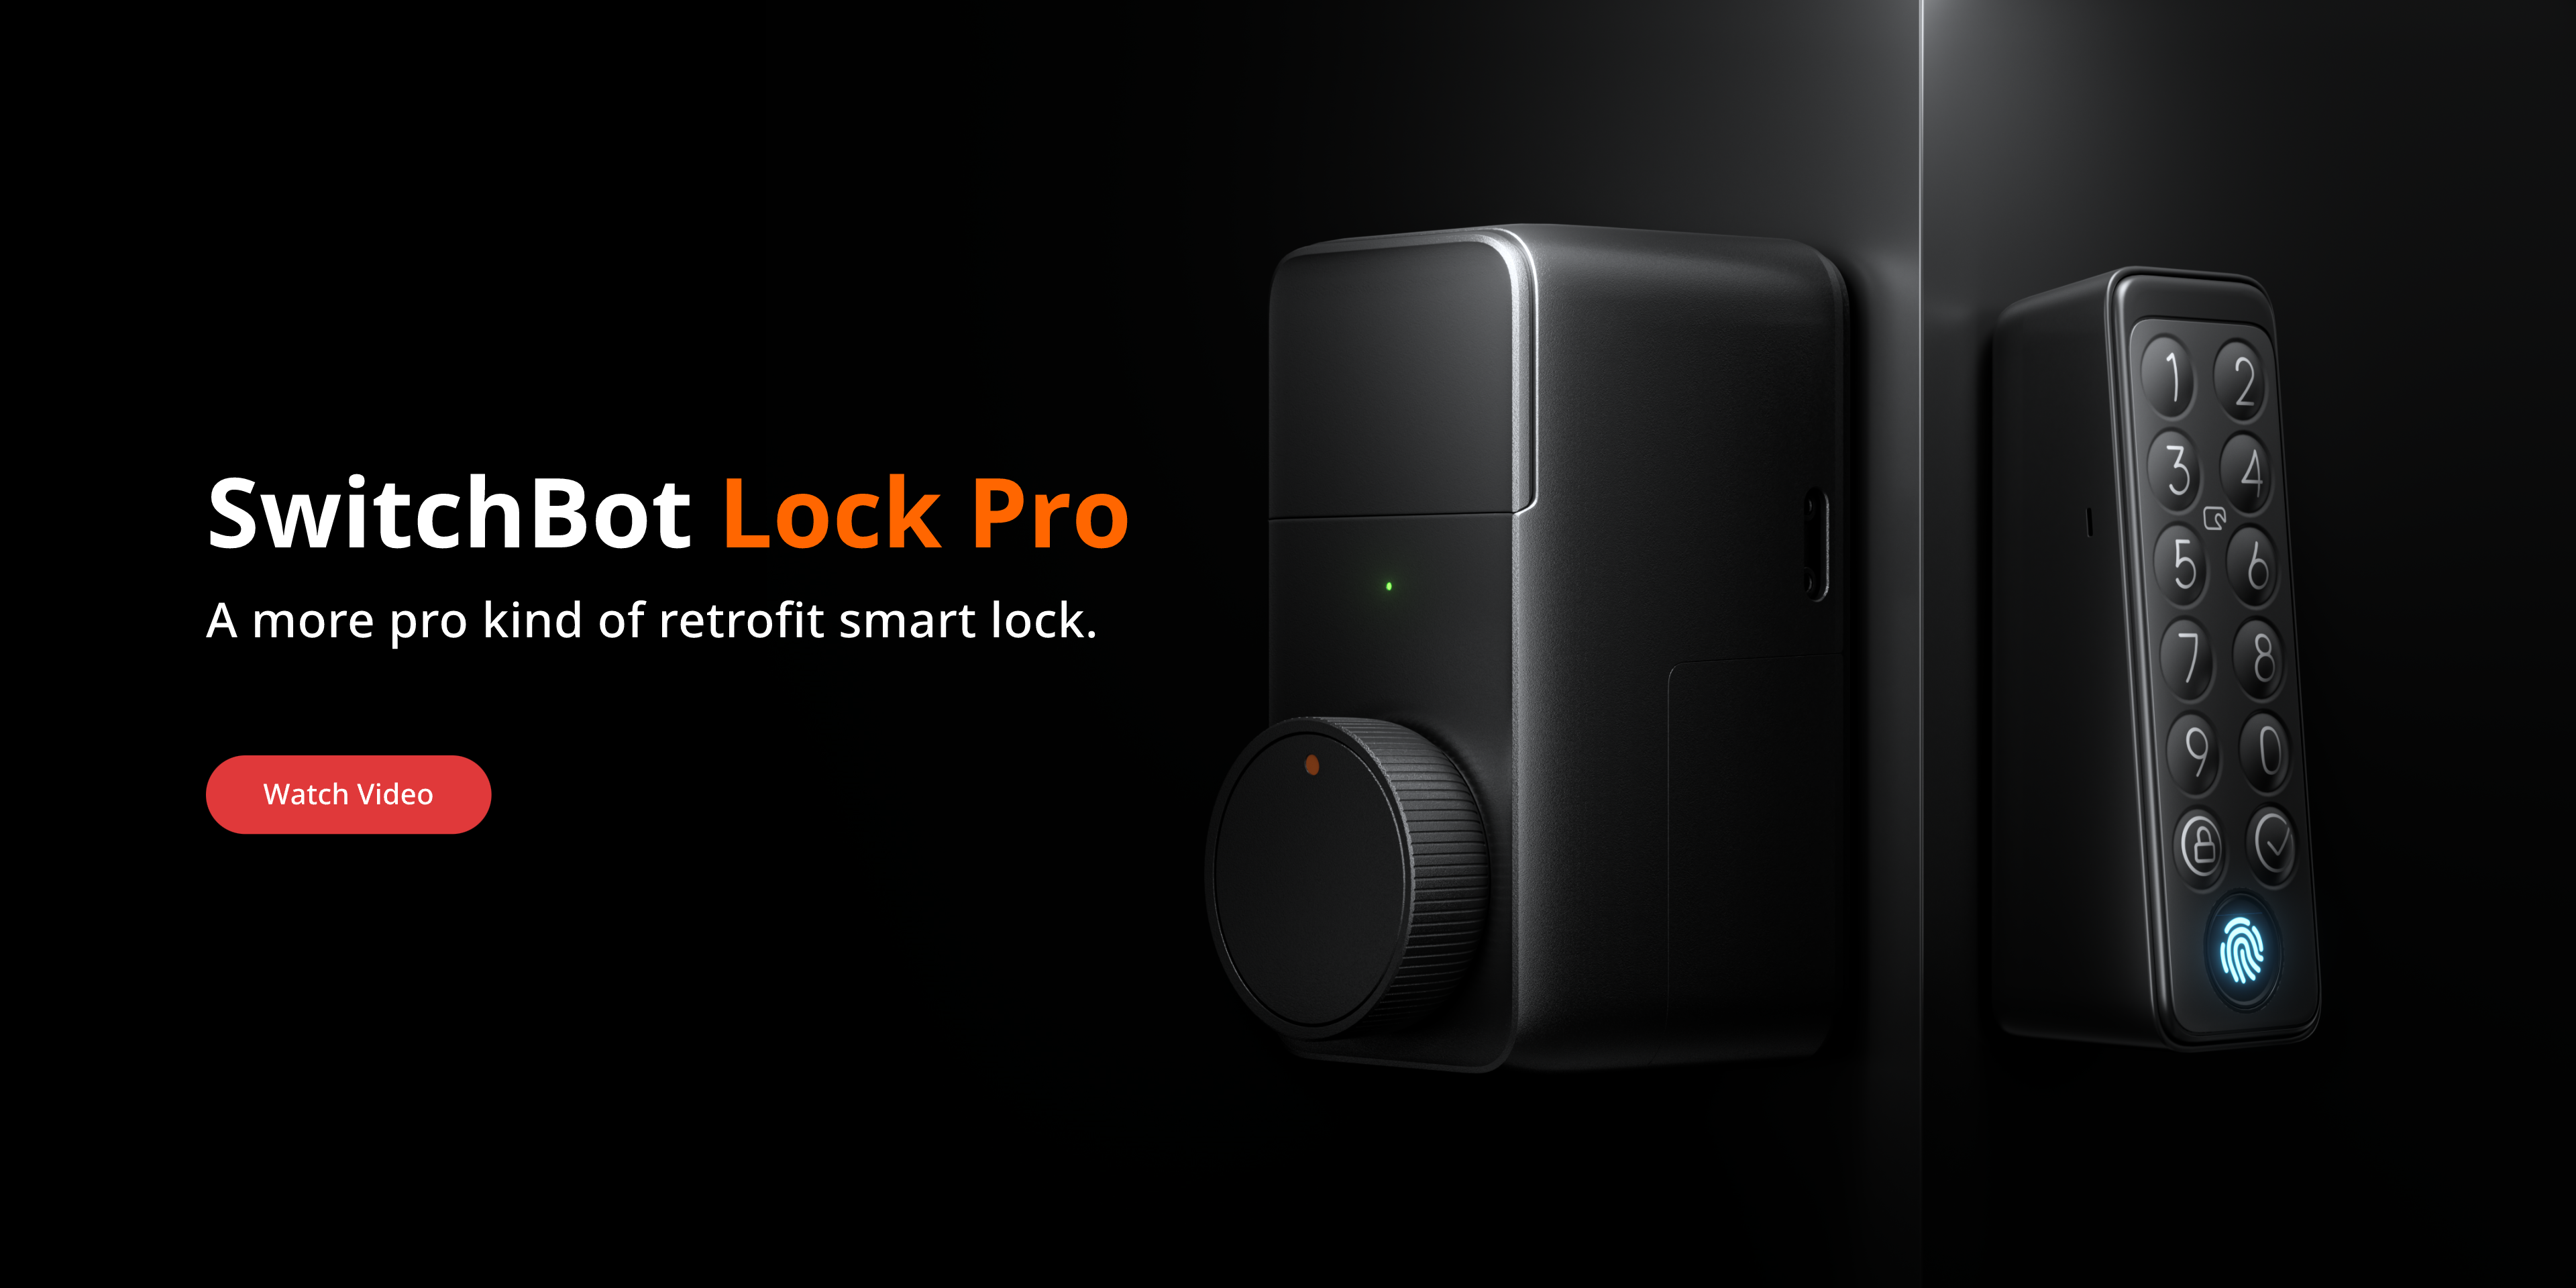 switchbot lock pro (3).png__PID:939579b9-9444-4cd8-ad85-c3ade93fabb8